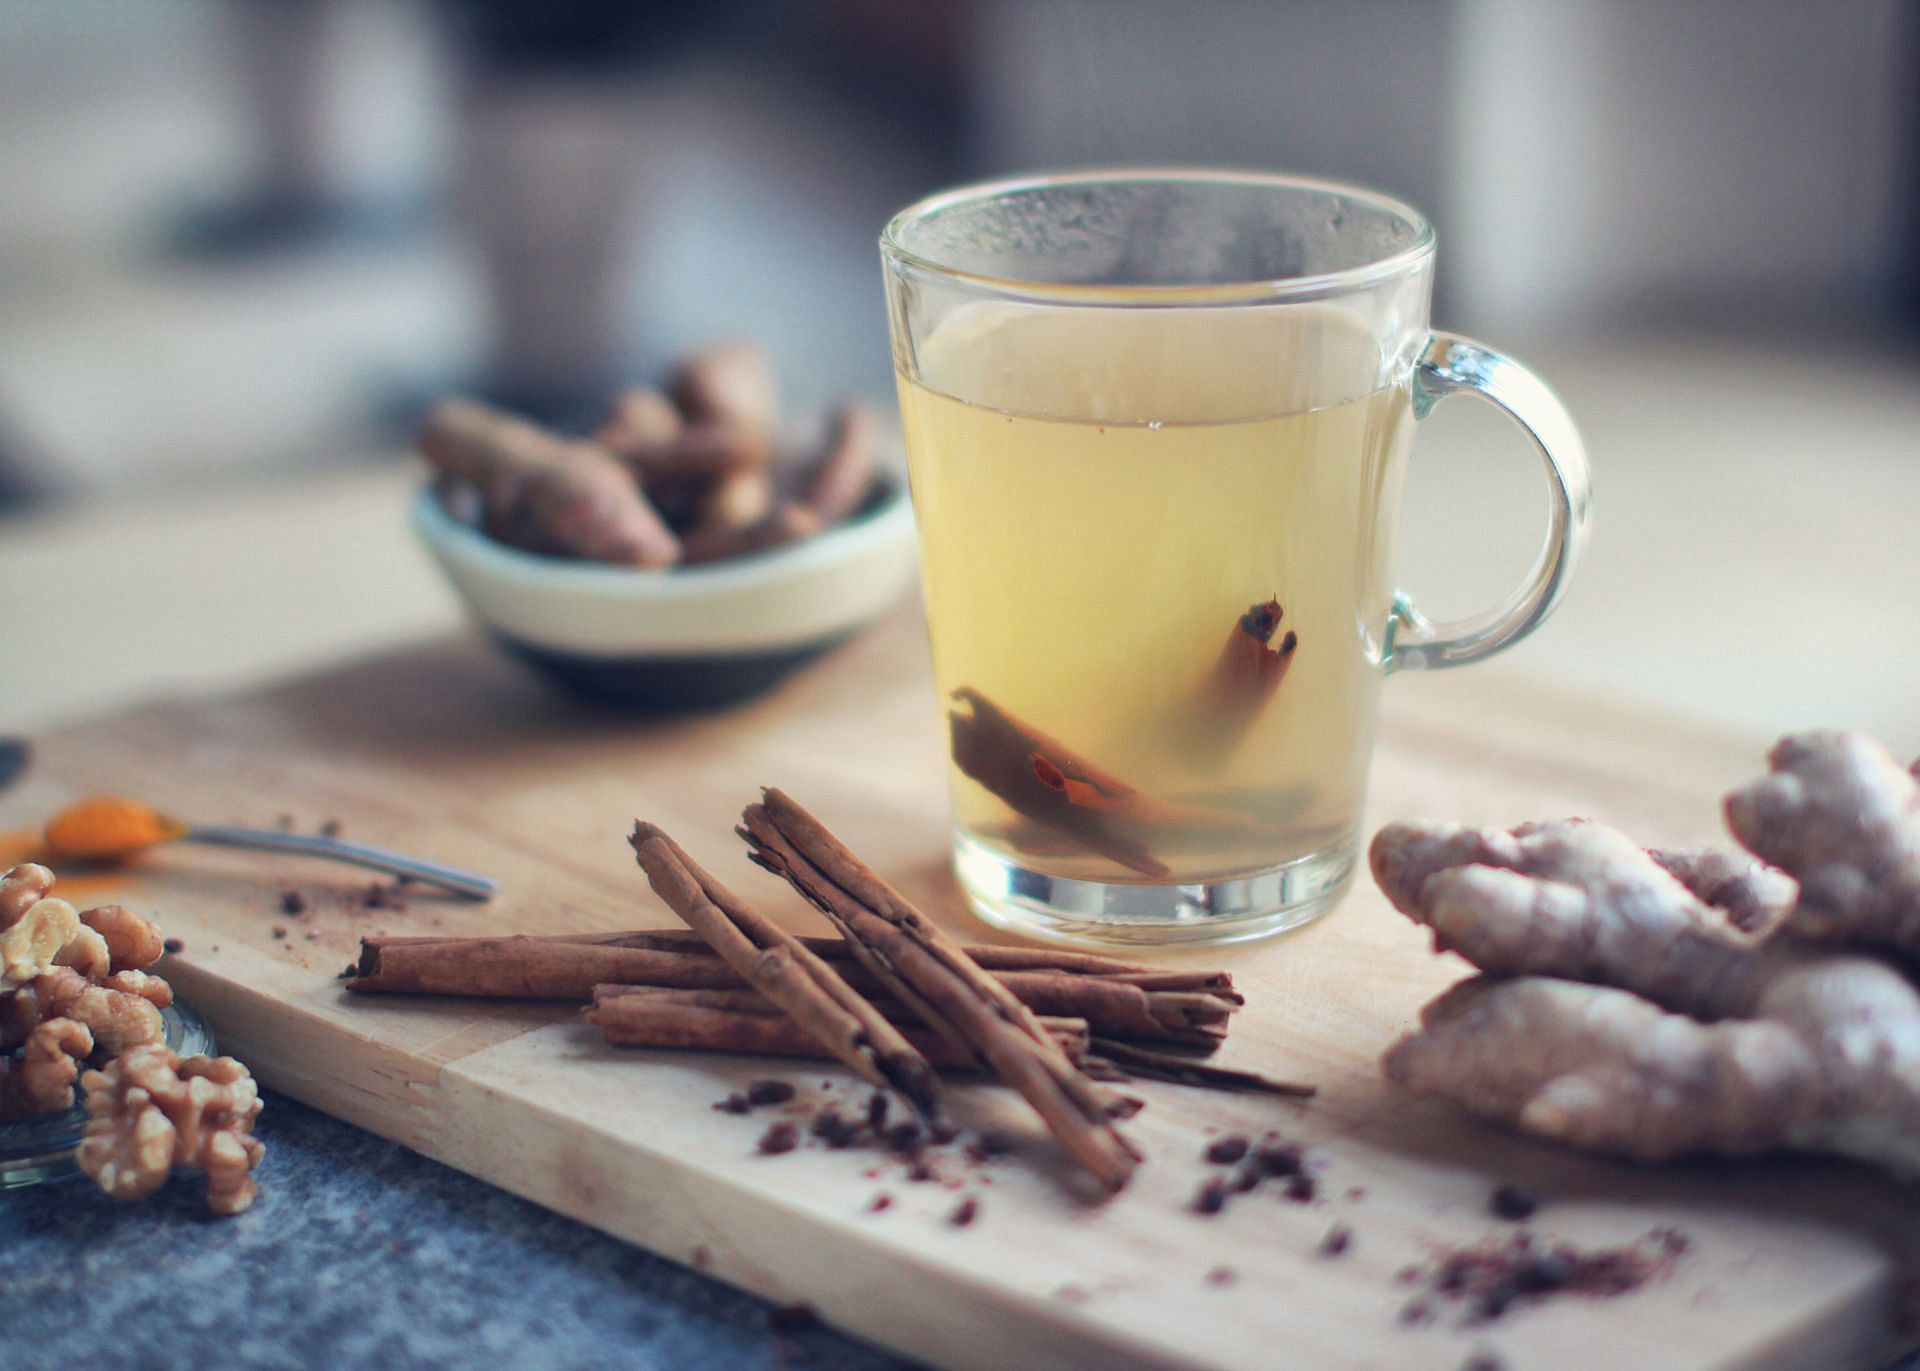 Ginger tea can cure nausea and morning sickness (Image by Julia Topp/Unsplash)